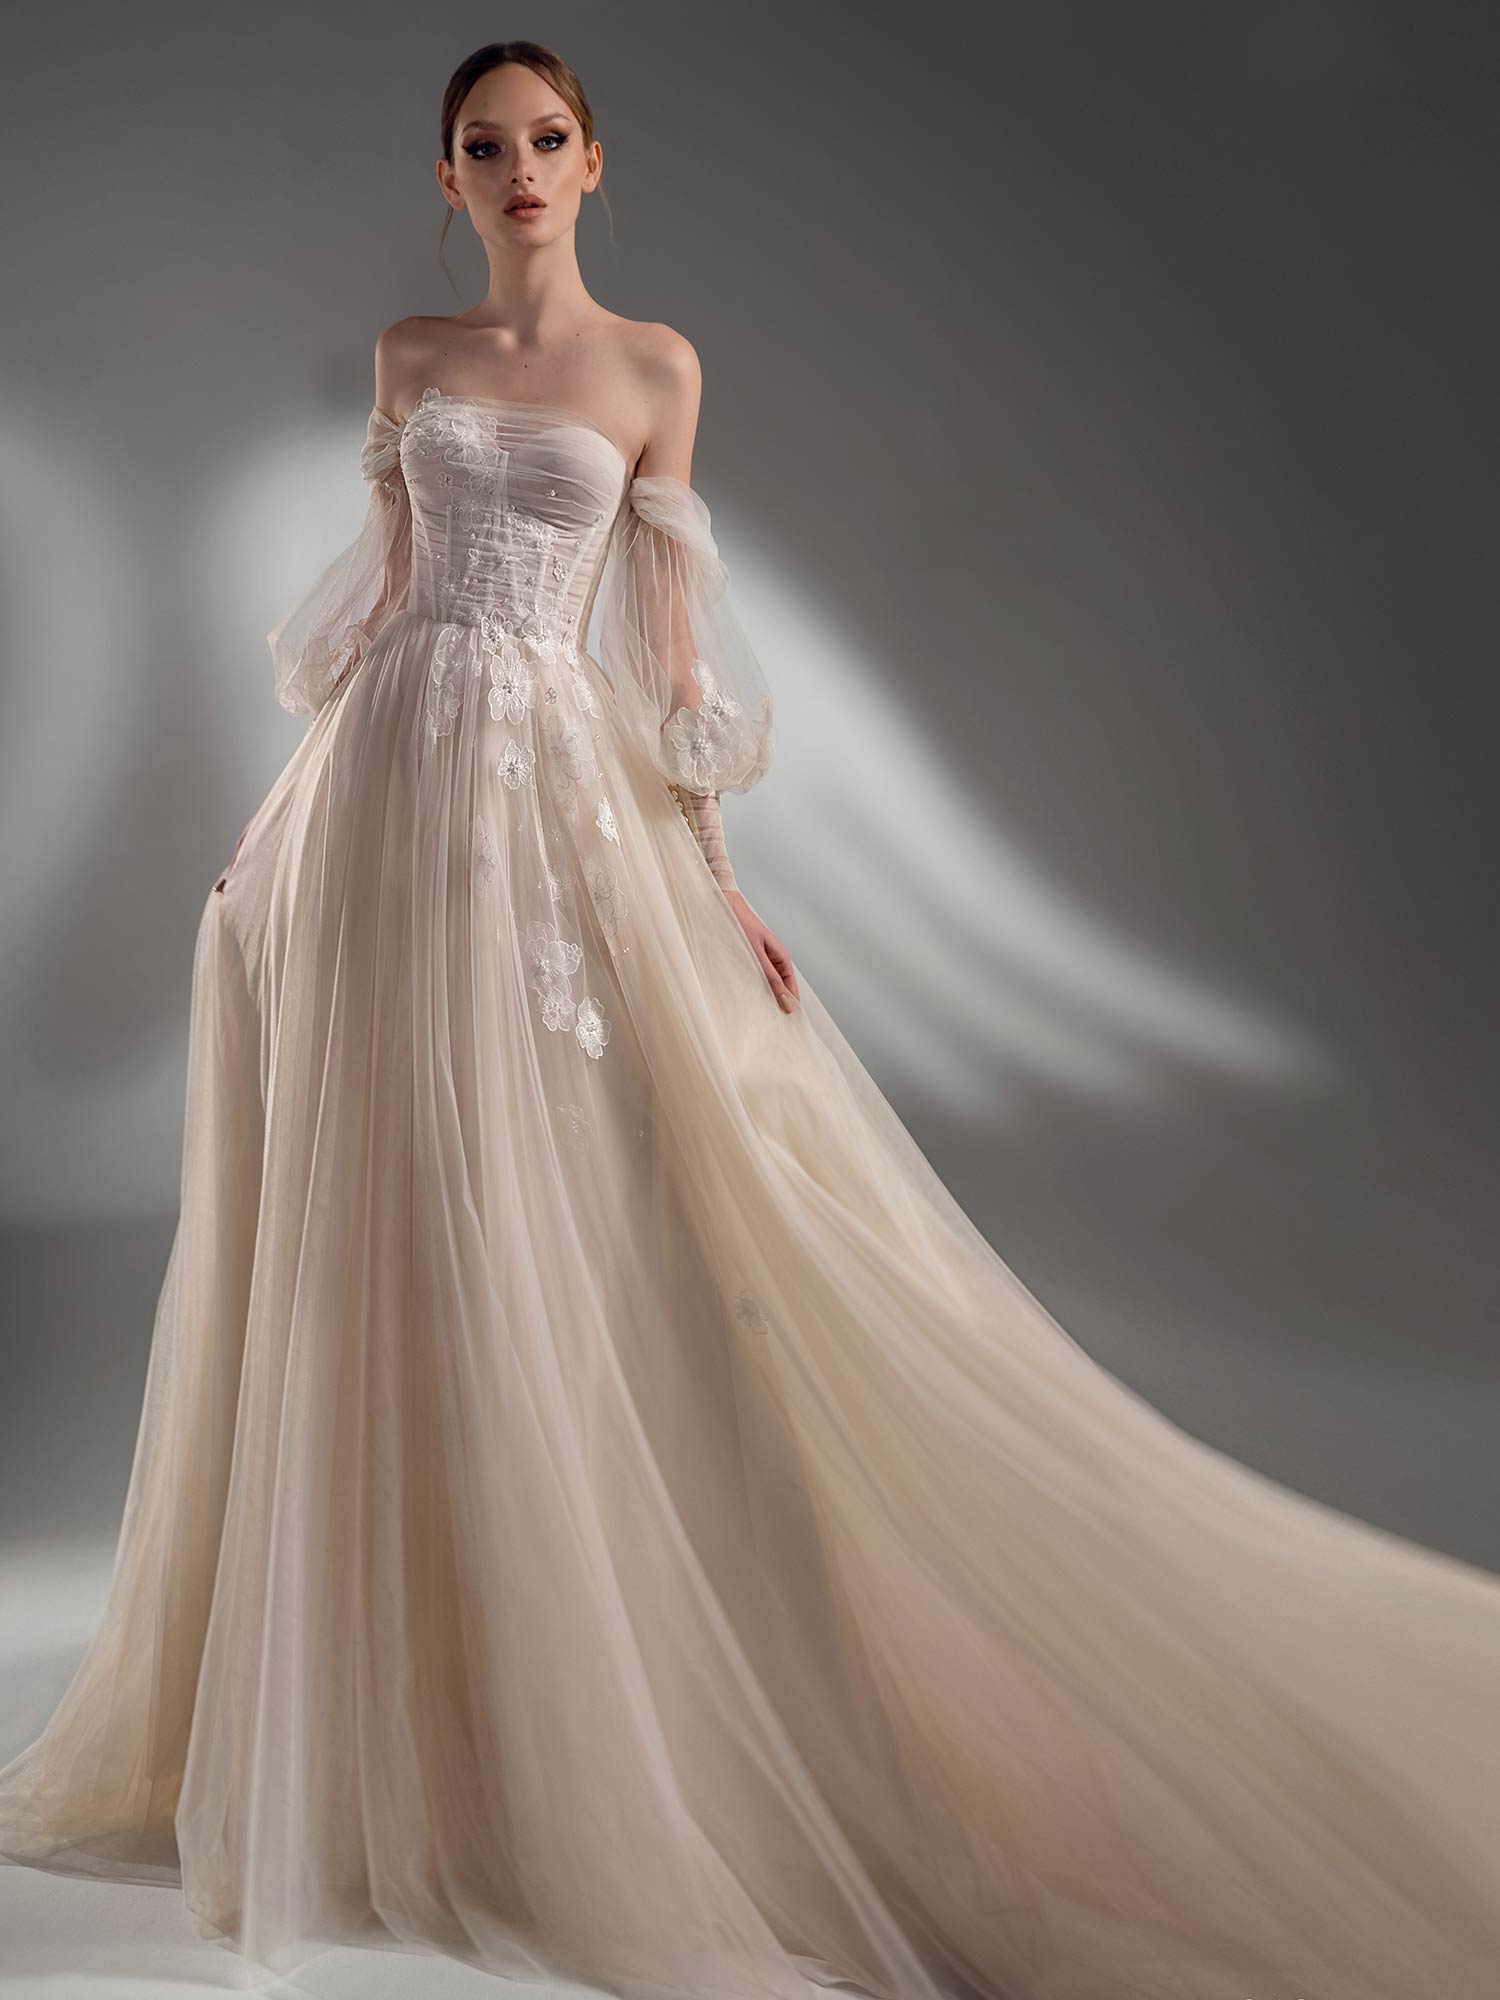 Style #2121, off the shoulder A-line wedding dress with detachable sleeves, available in cream–nude, ivory